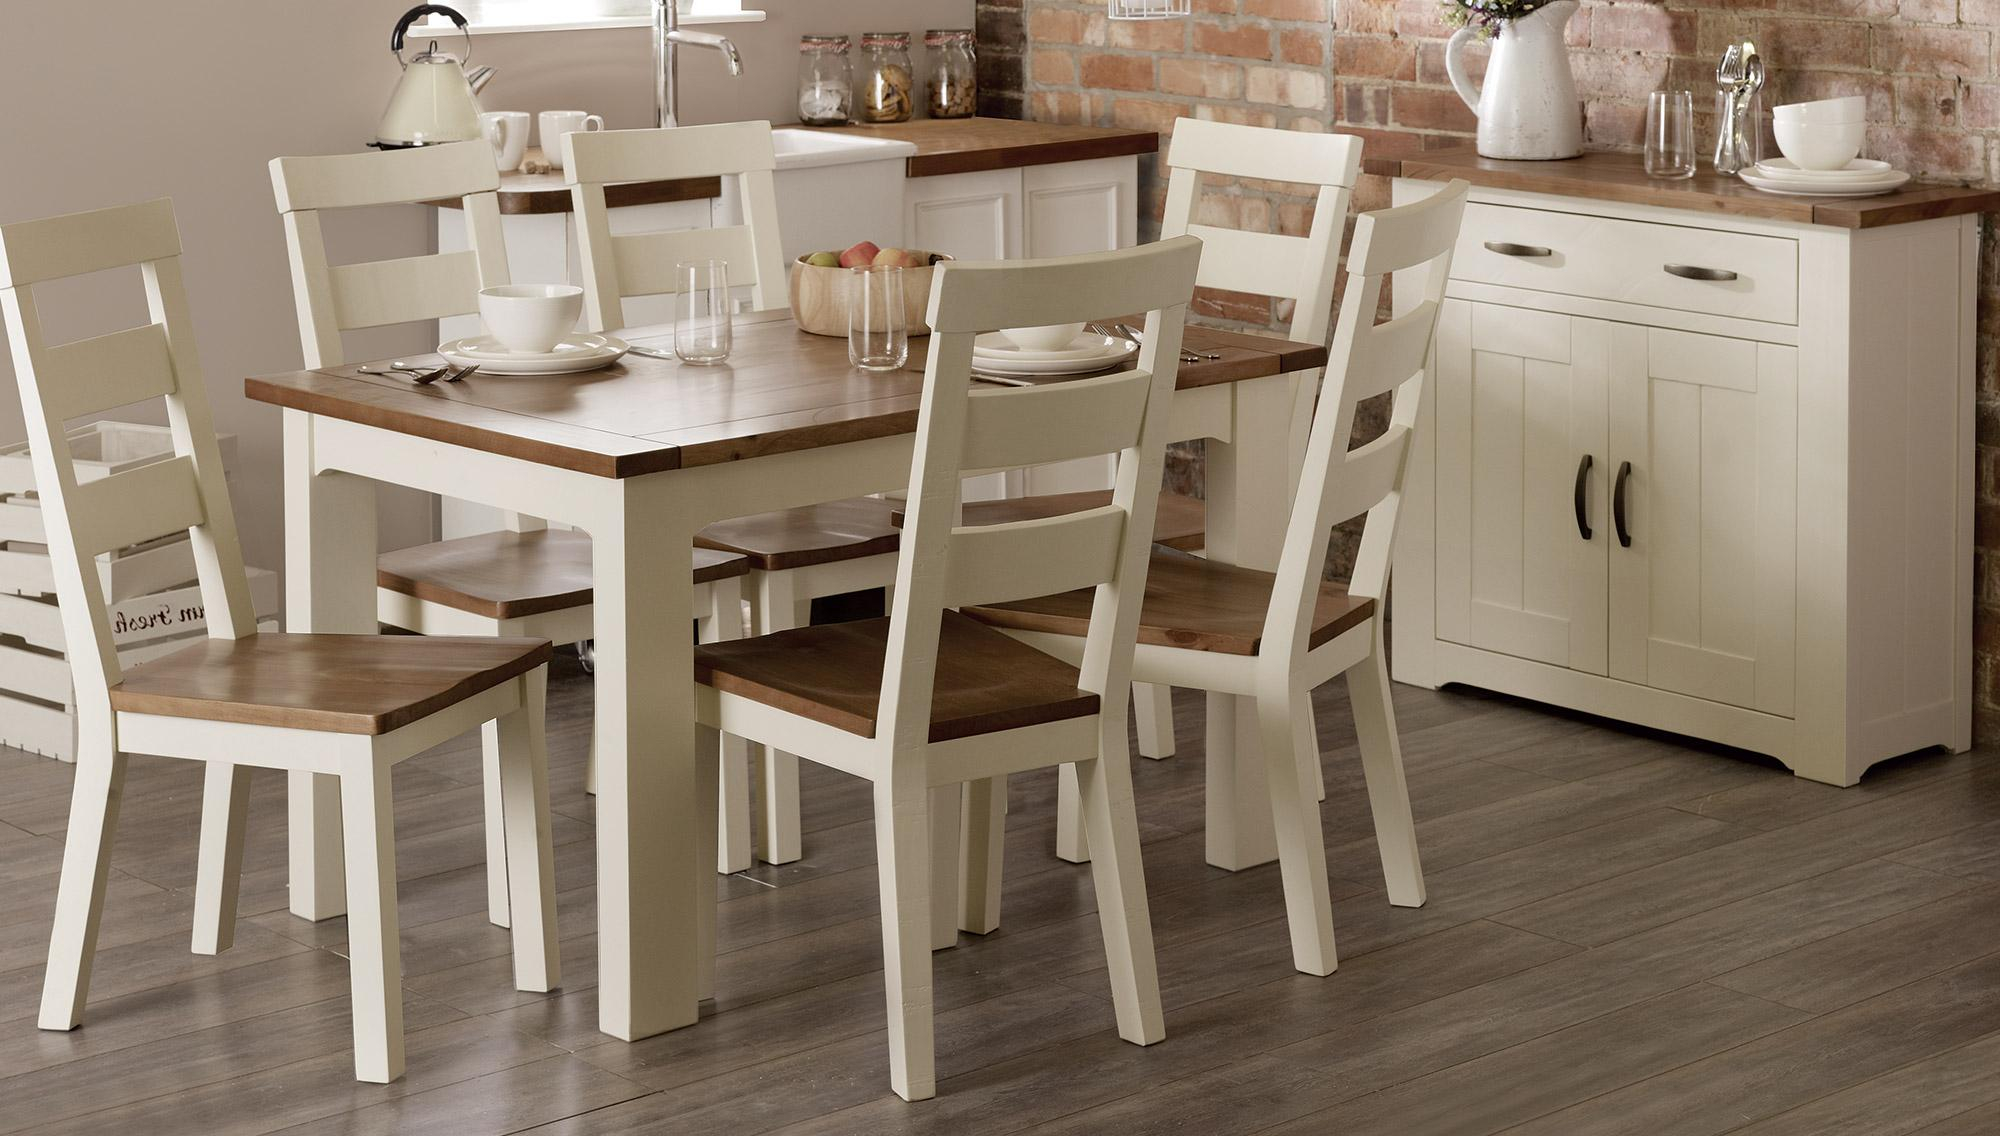 Dining Table And Chairs Dunelm Mill Dining Room Furniture throughout dimensions 2000 X 1136